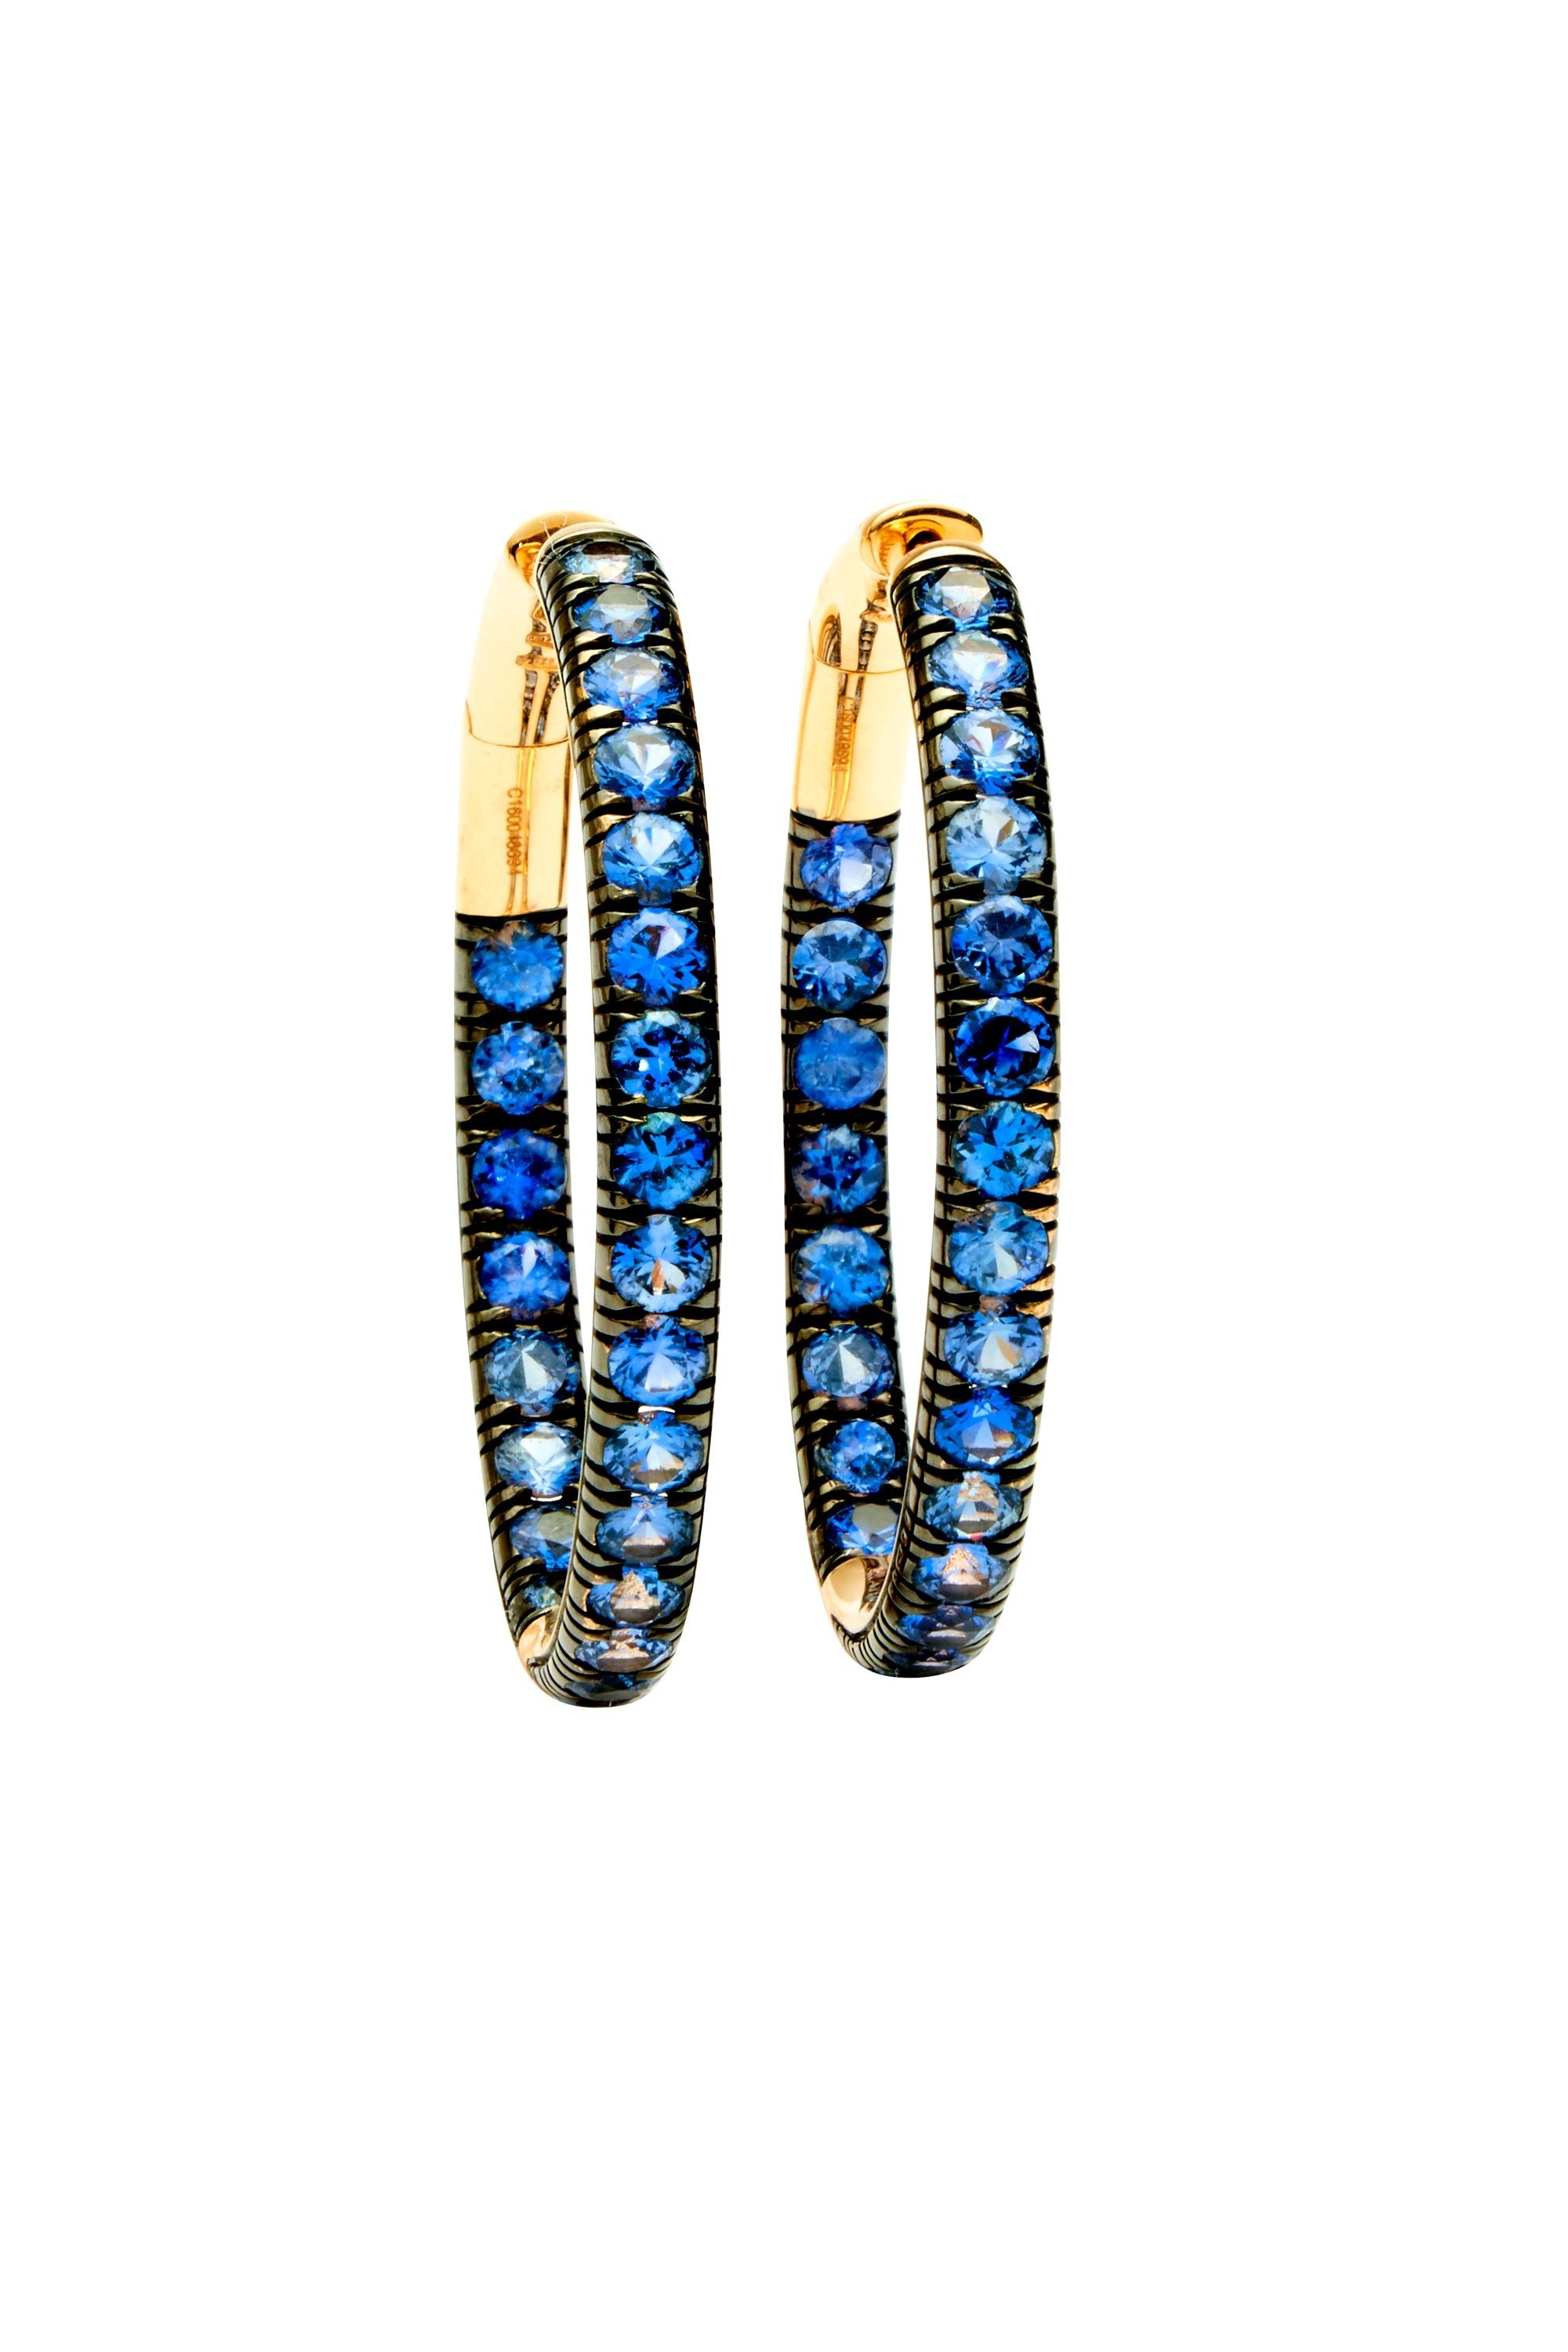 Pomellato Sapphire and 18k Rose Gold Hoop Earrings - Foxy Couture Carmel